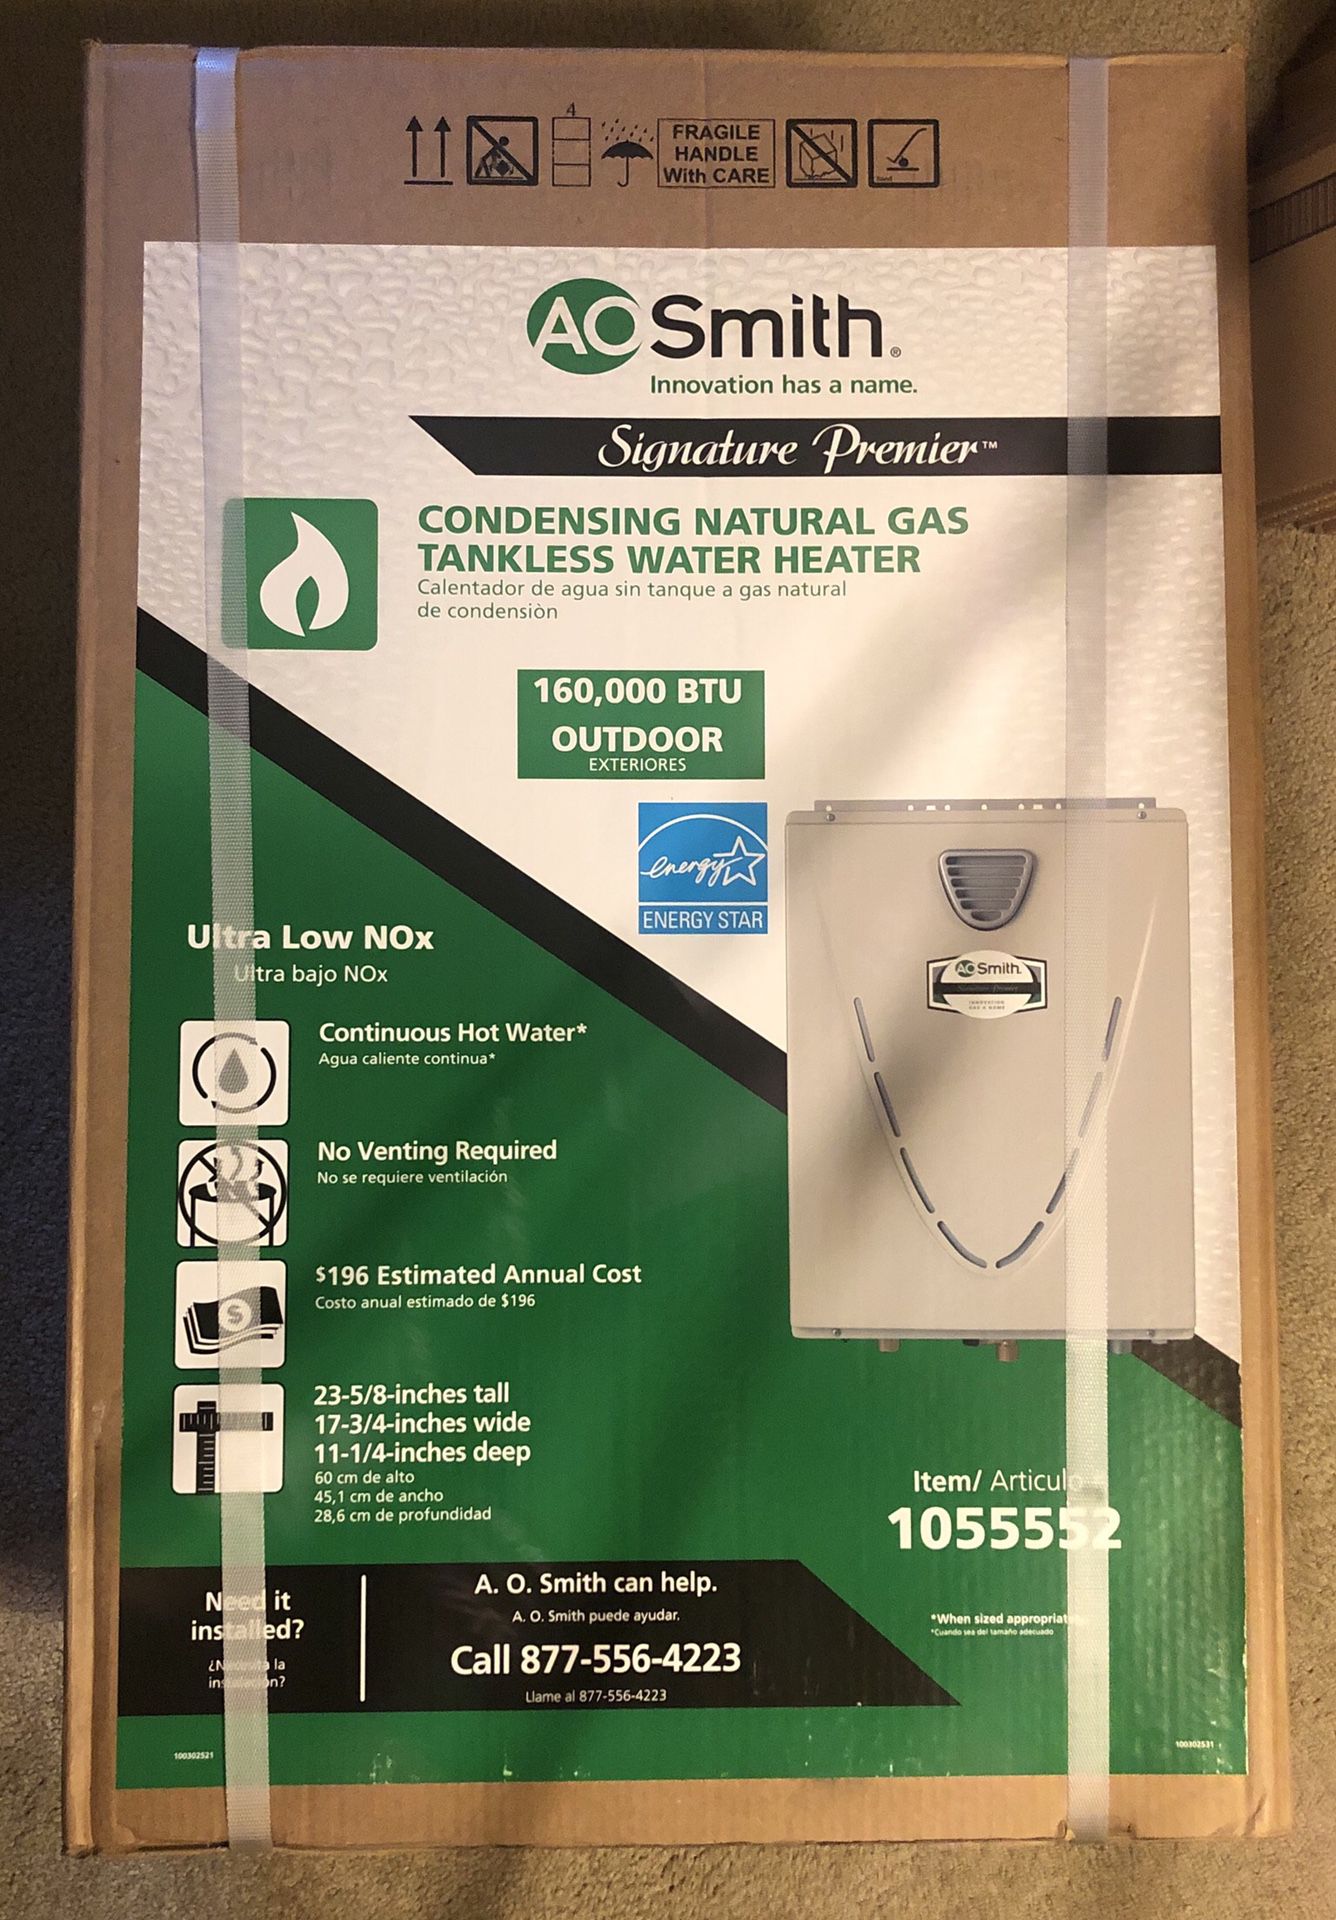 AO Smith 160,000 BTU Outdoor Tankless Natural Gas Water Heater.